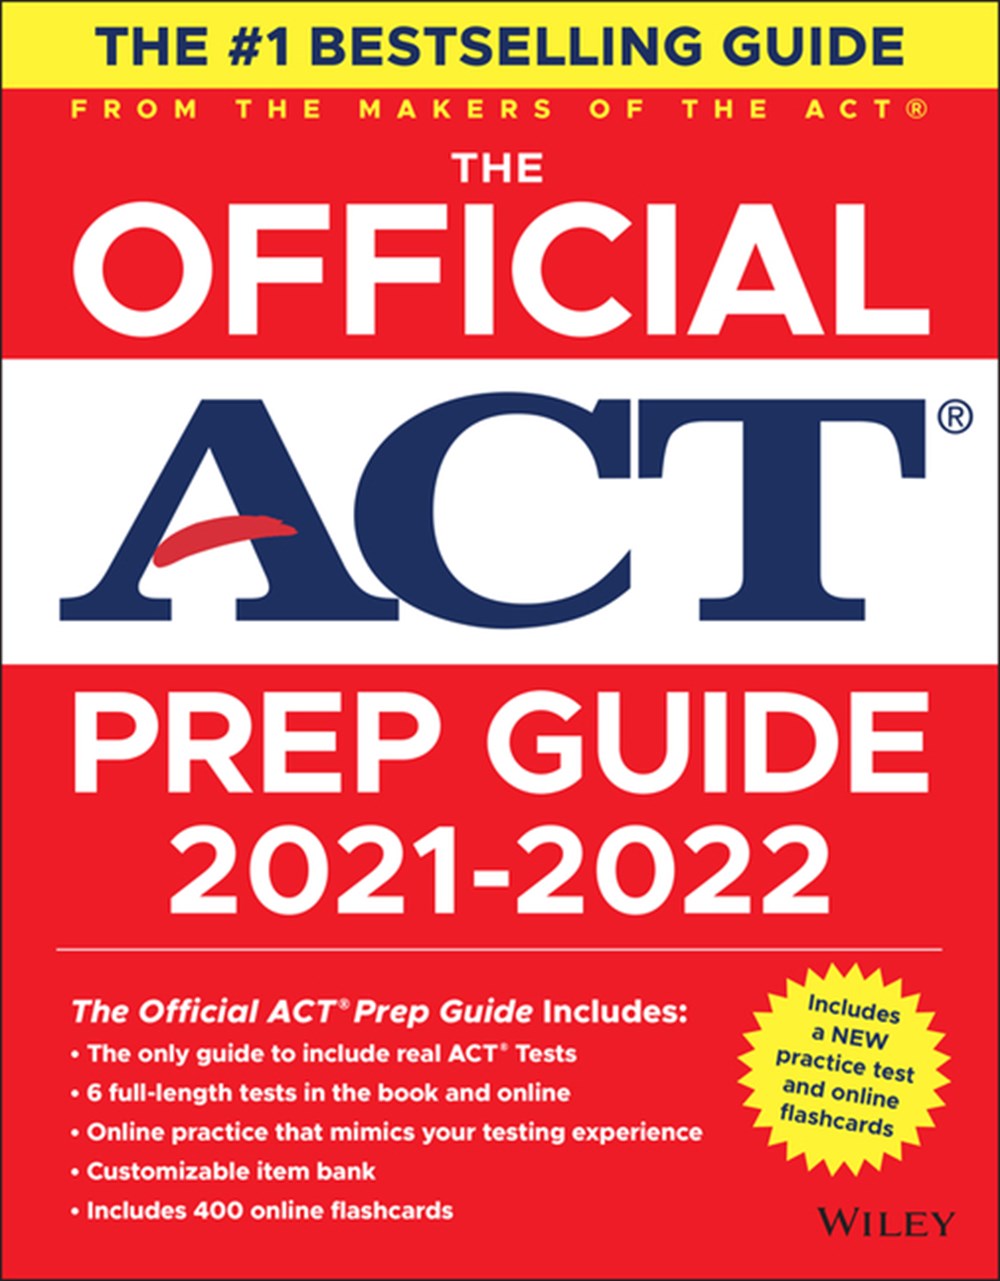 Official ACT Prep Guide 2021-2022